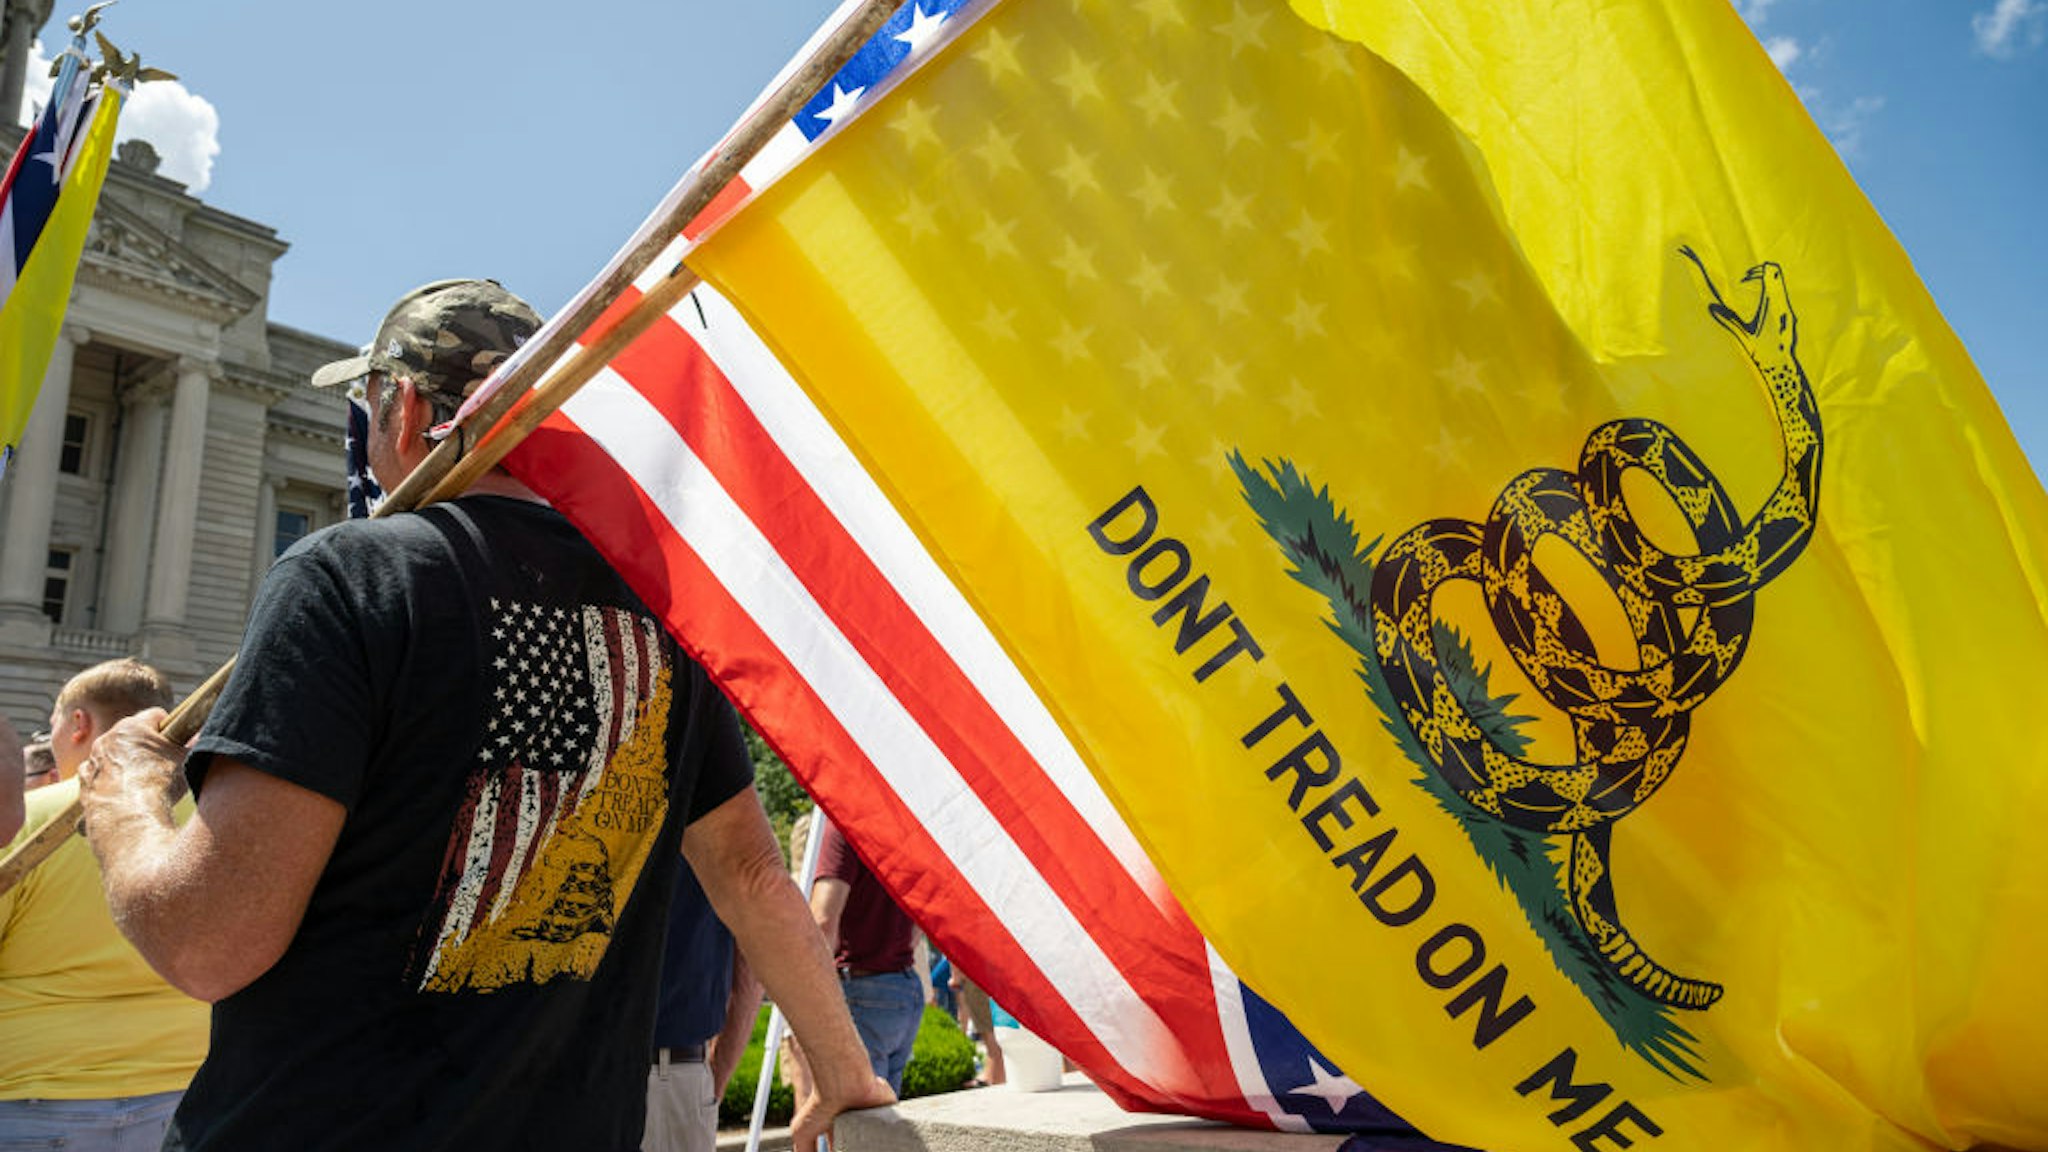 FRANKFORT, KY - AUGUST 28: A man with a Gadsden flag, a US flag, and a Confederate battle flag listens to a speaker during the Kentucky Freedom Rally at the capitol building on August 28, 2021 in Frankfort, Kentucky. Demonstrators gathered on the grounds of the capitol to speak out against a litany of issues, including Kentucky Gov. Andy Beshears management of the coronavirus pandemic, abortion laws, and the teaching of critical race theory. Demonstrators and speakers also refuted the legitimacy of the 2020 United State presidential election, claiming that former President Donald Trump won and should be reinstated. (Photo by Jon Cherry/Getty Images)